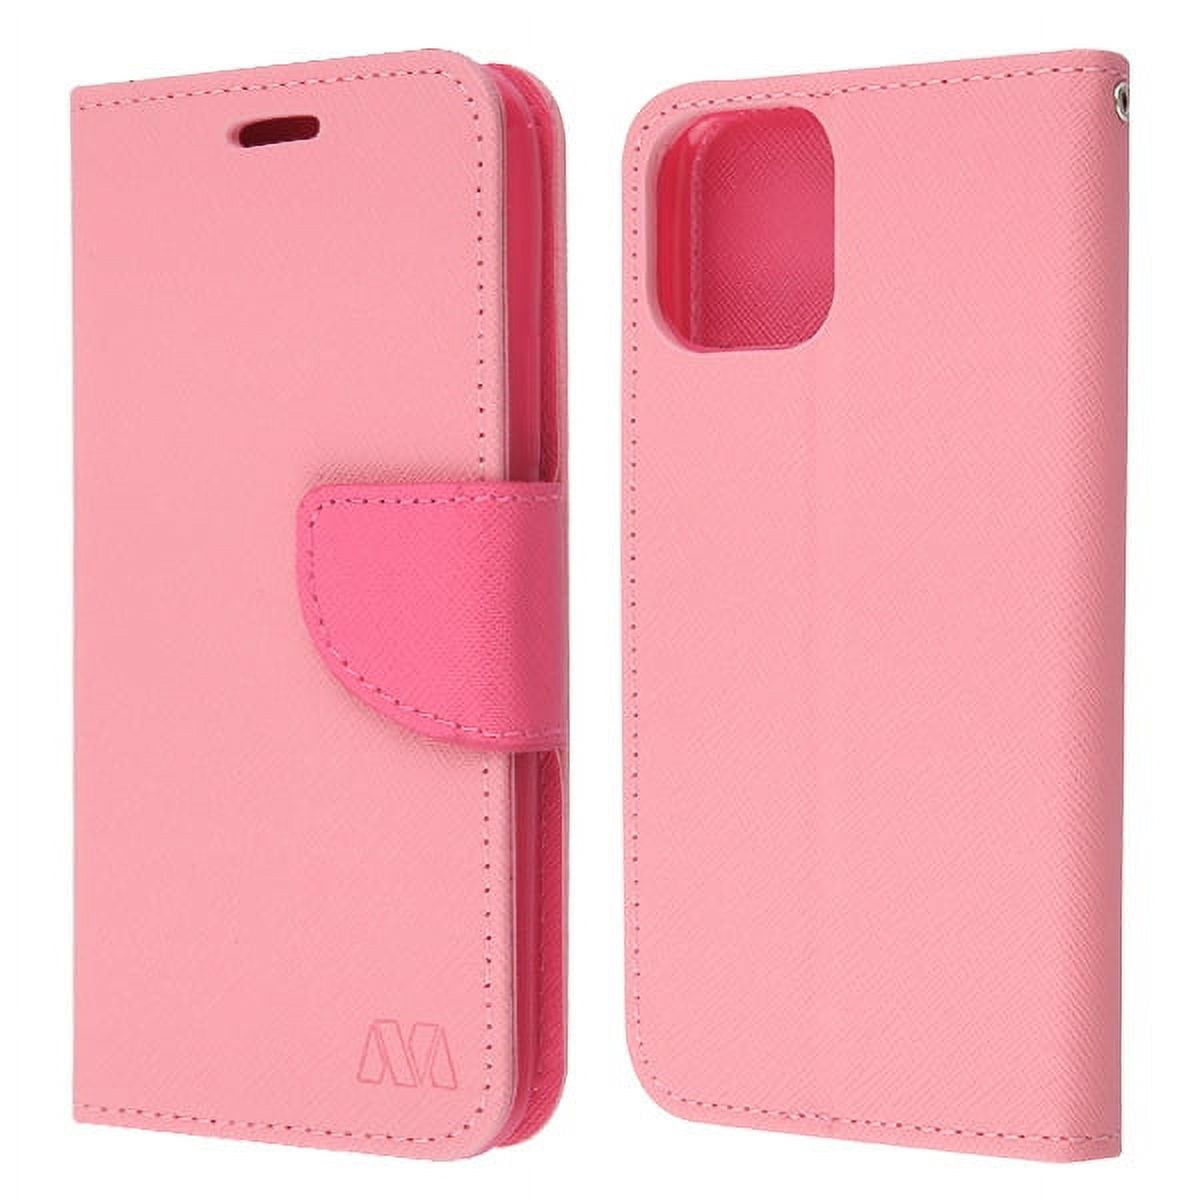 iPhone 11 Pro Max Case, Cellularvilla Diary Style Pu Leather Wallet [Card  Slot] [Square-Pattern] [Magnetic Closure] [Wristlet] Flip Stand Case For  Apple iPhone 11 Pro Max 